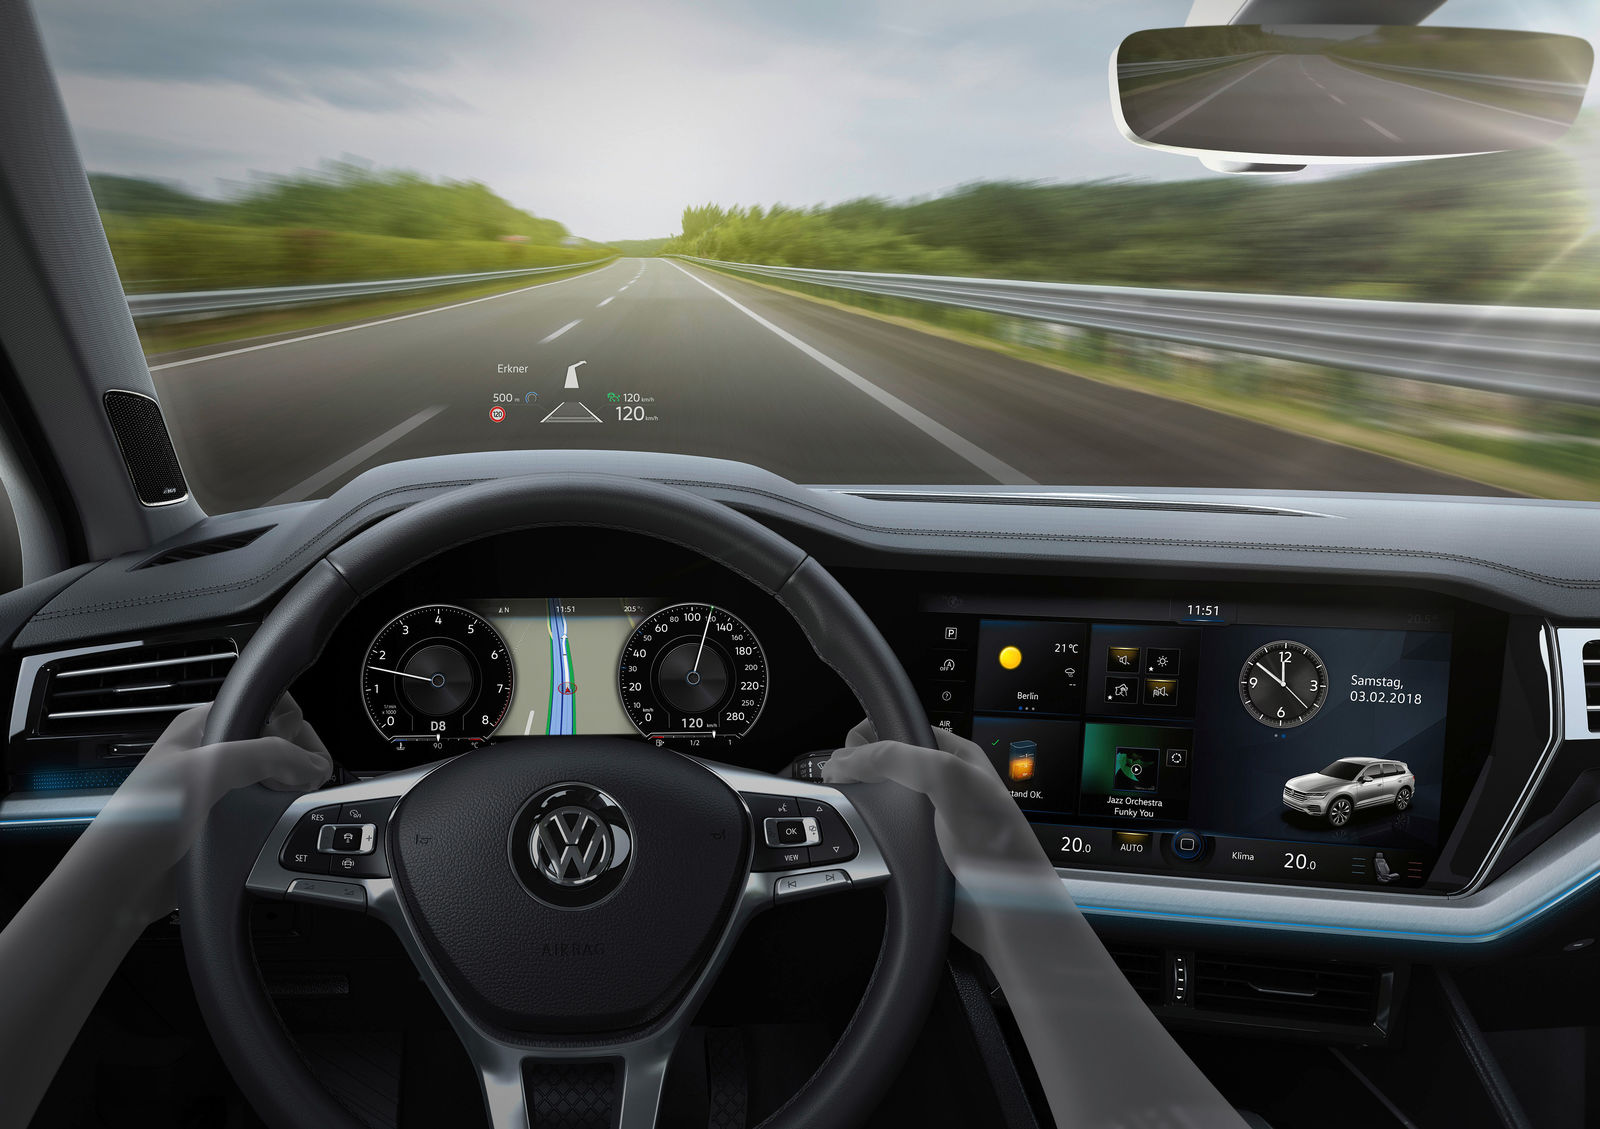 How Does a Heads-Up Display (HUD) Work?